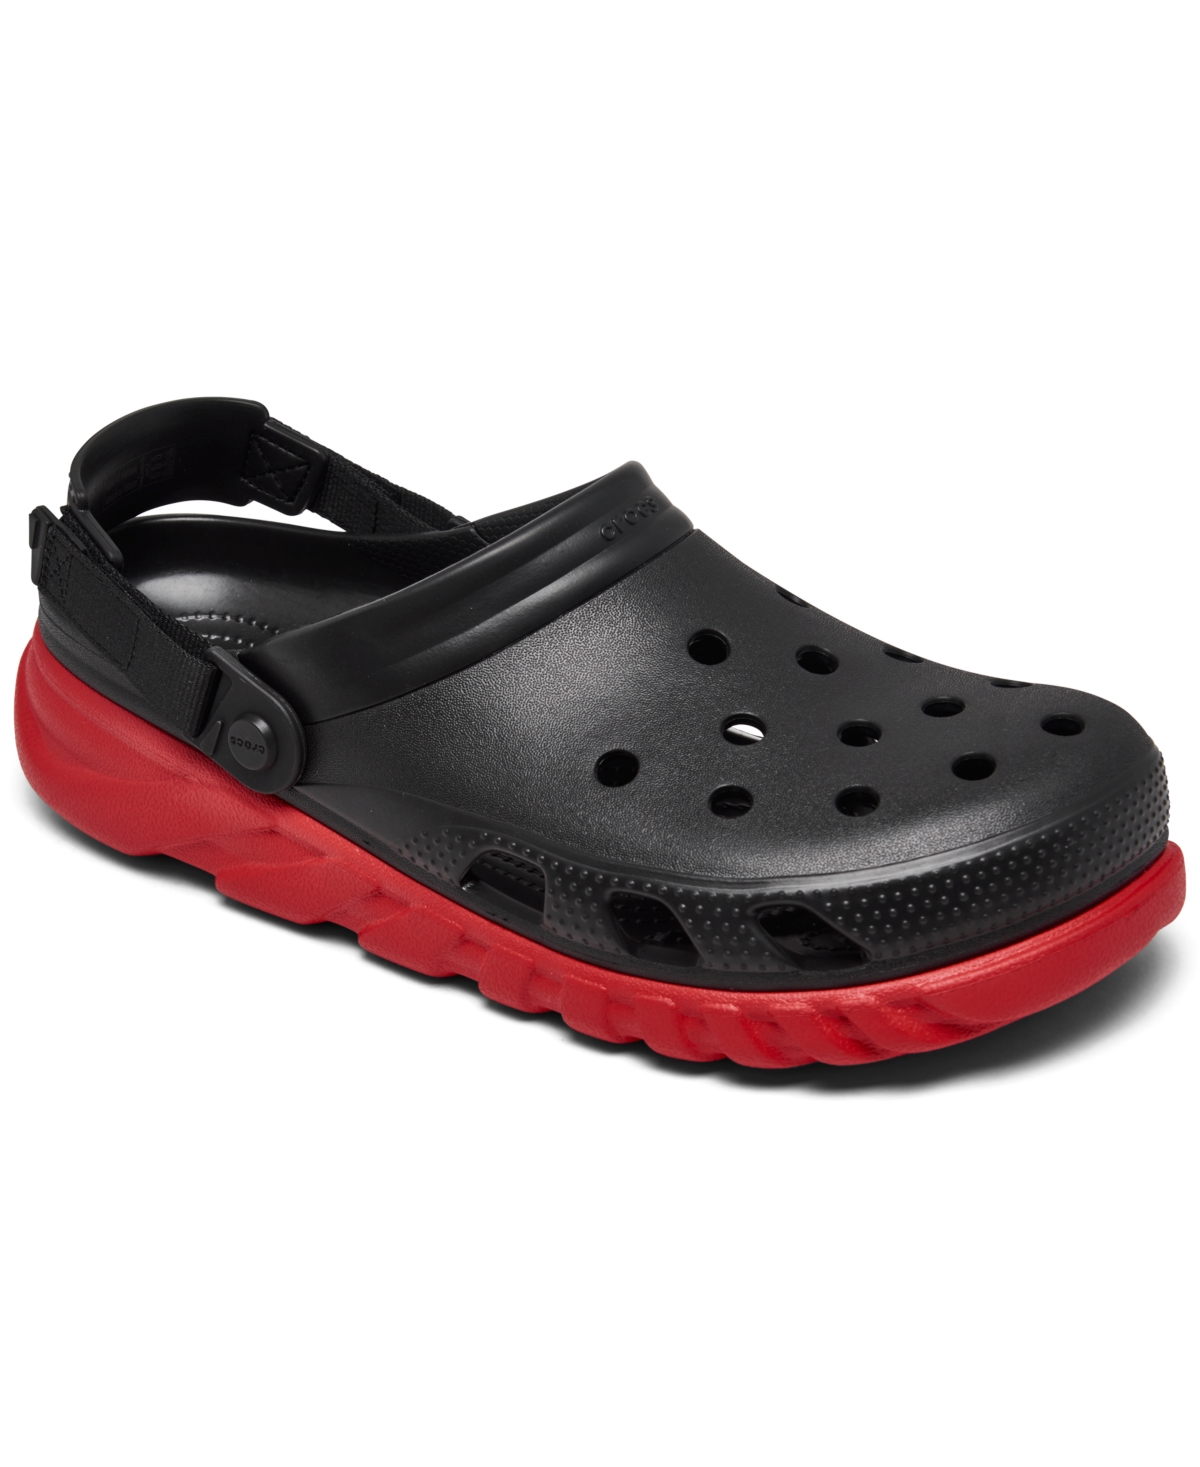 Crocs Men's Duet Max Clogs From Finish Line In Black,red